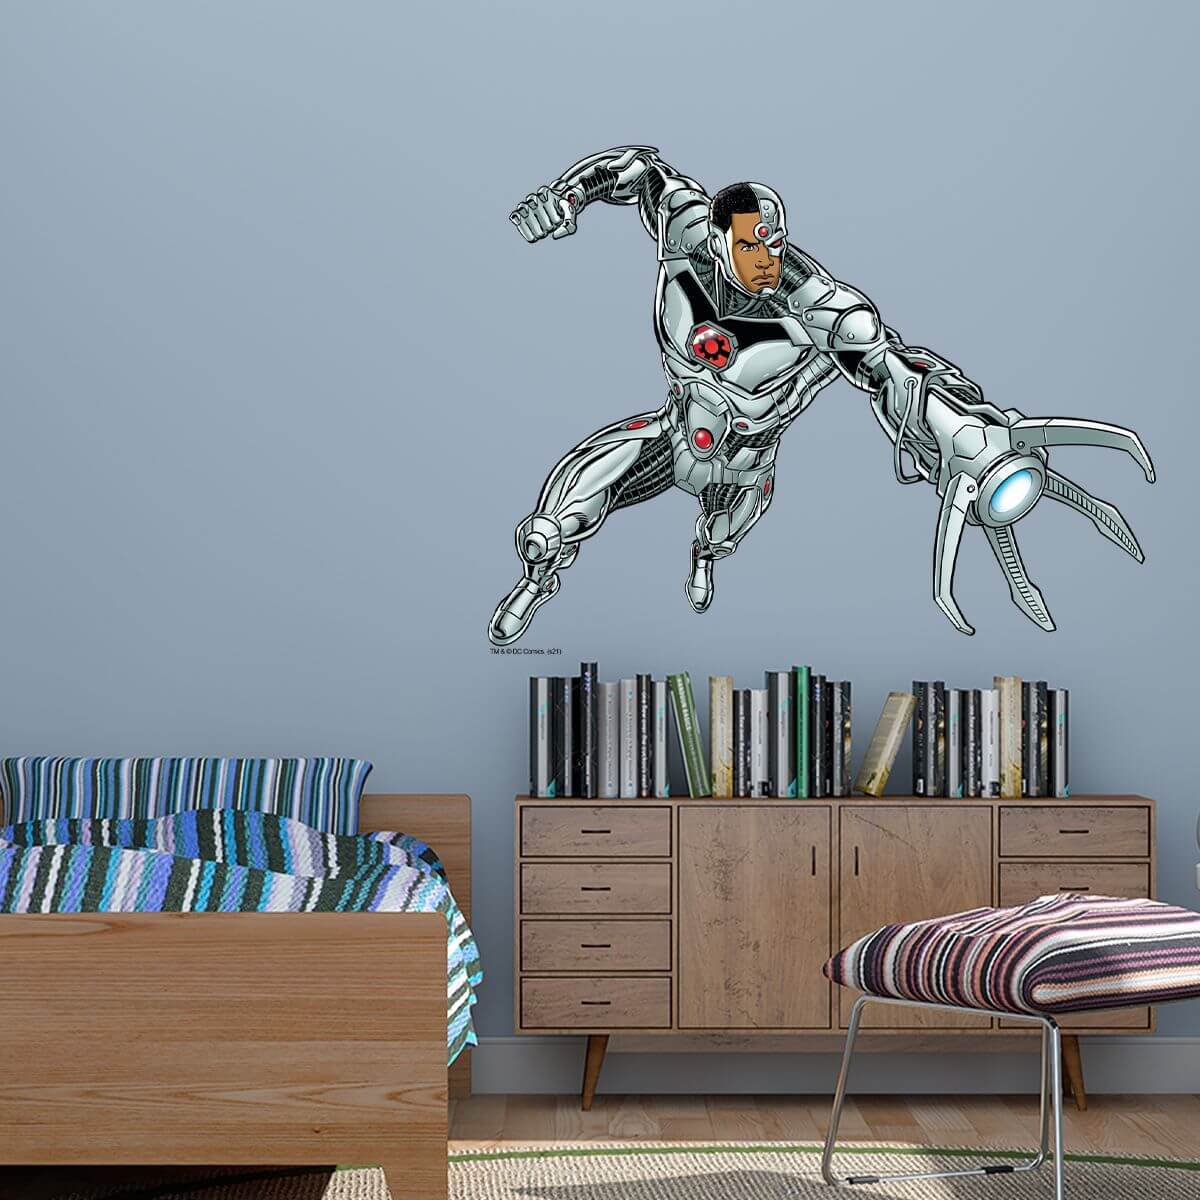 Kismet Decals Cyborg Leap Attack Licensed Wall Sticker - Easy DIY Justice League Home & Room Decor Wall Art - Kismet Decals